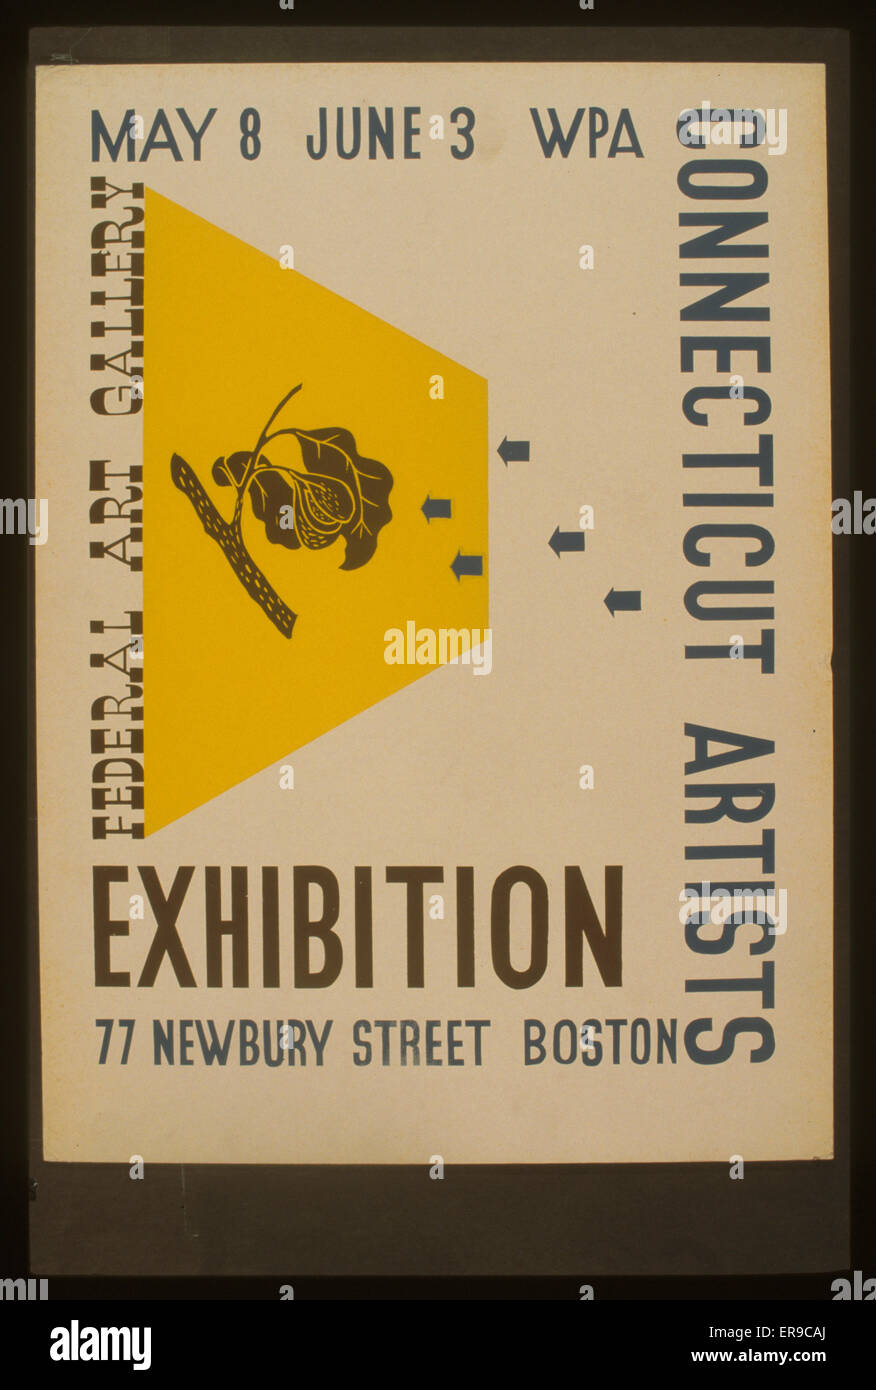 Exhibition WPA Connecticut artists. Poster for Federal Art Project exhibition of WPA Connecticut artists at the Federal Art Gallery, 77 Newbury Street, Boston, Mass., showing tree stem with leaves. Date between 1936 and 1939. Stock Photo